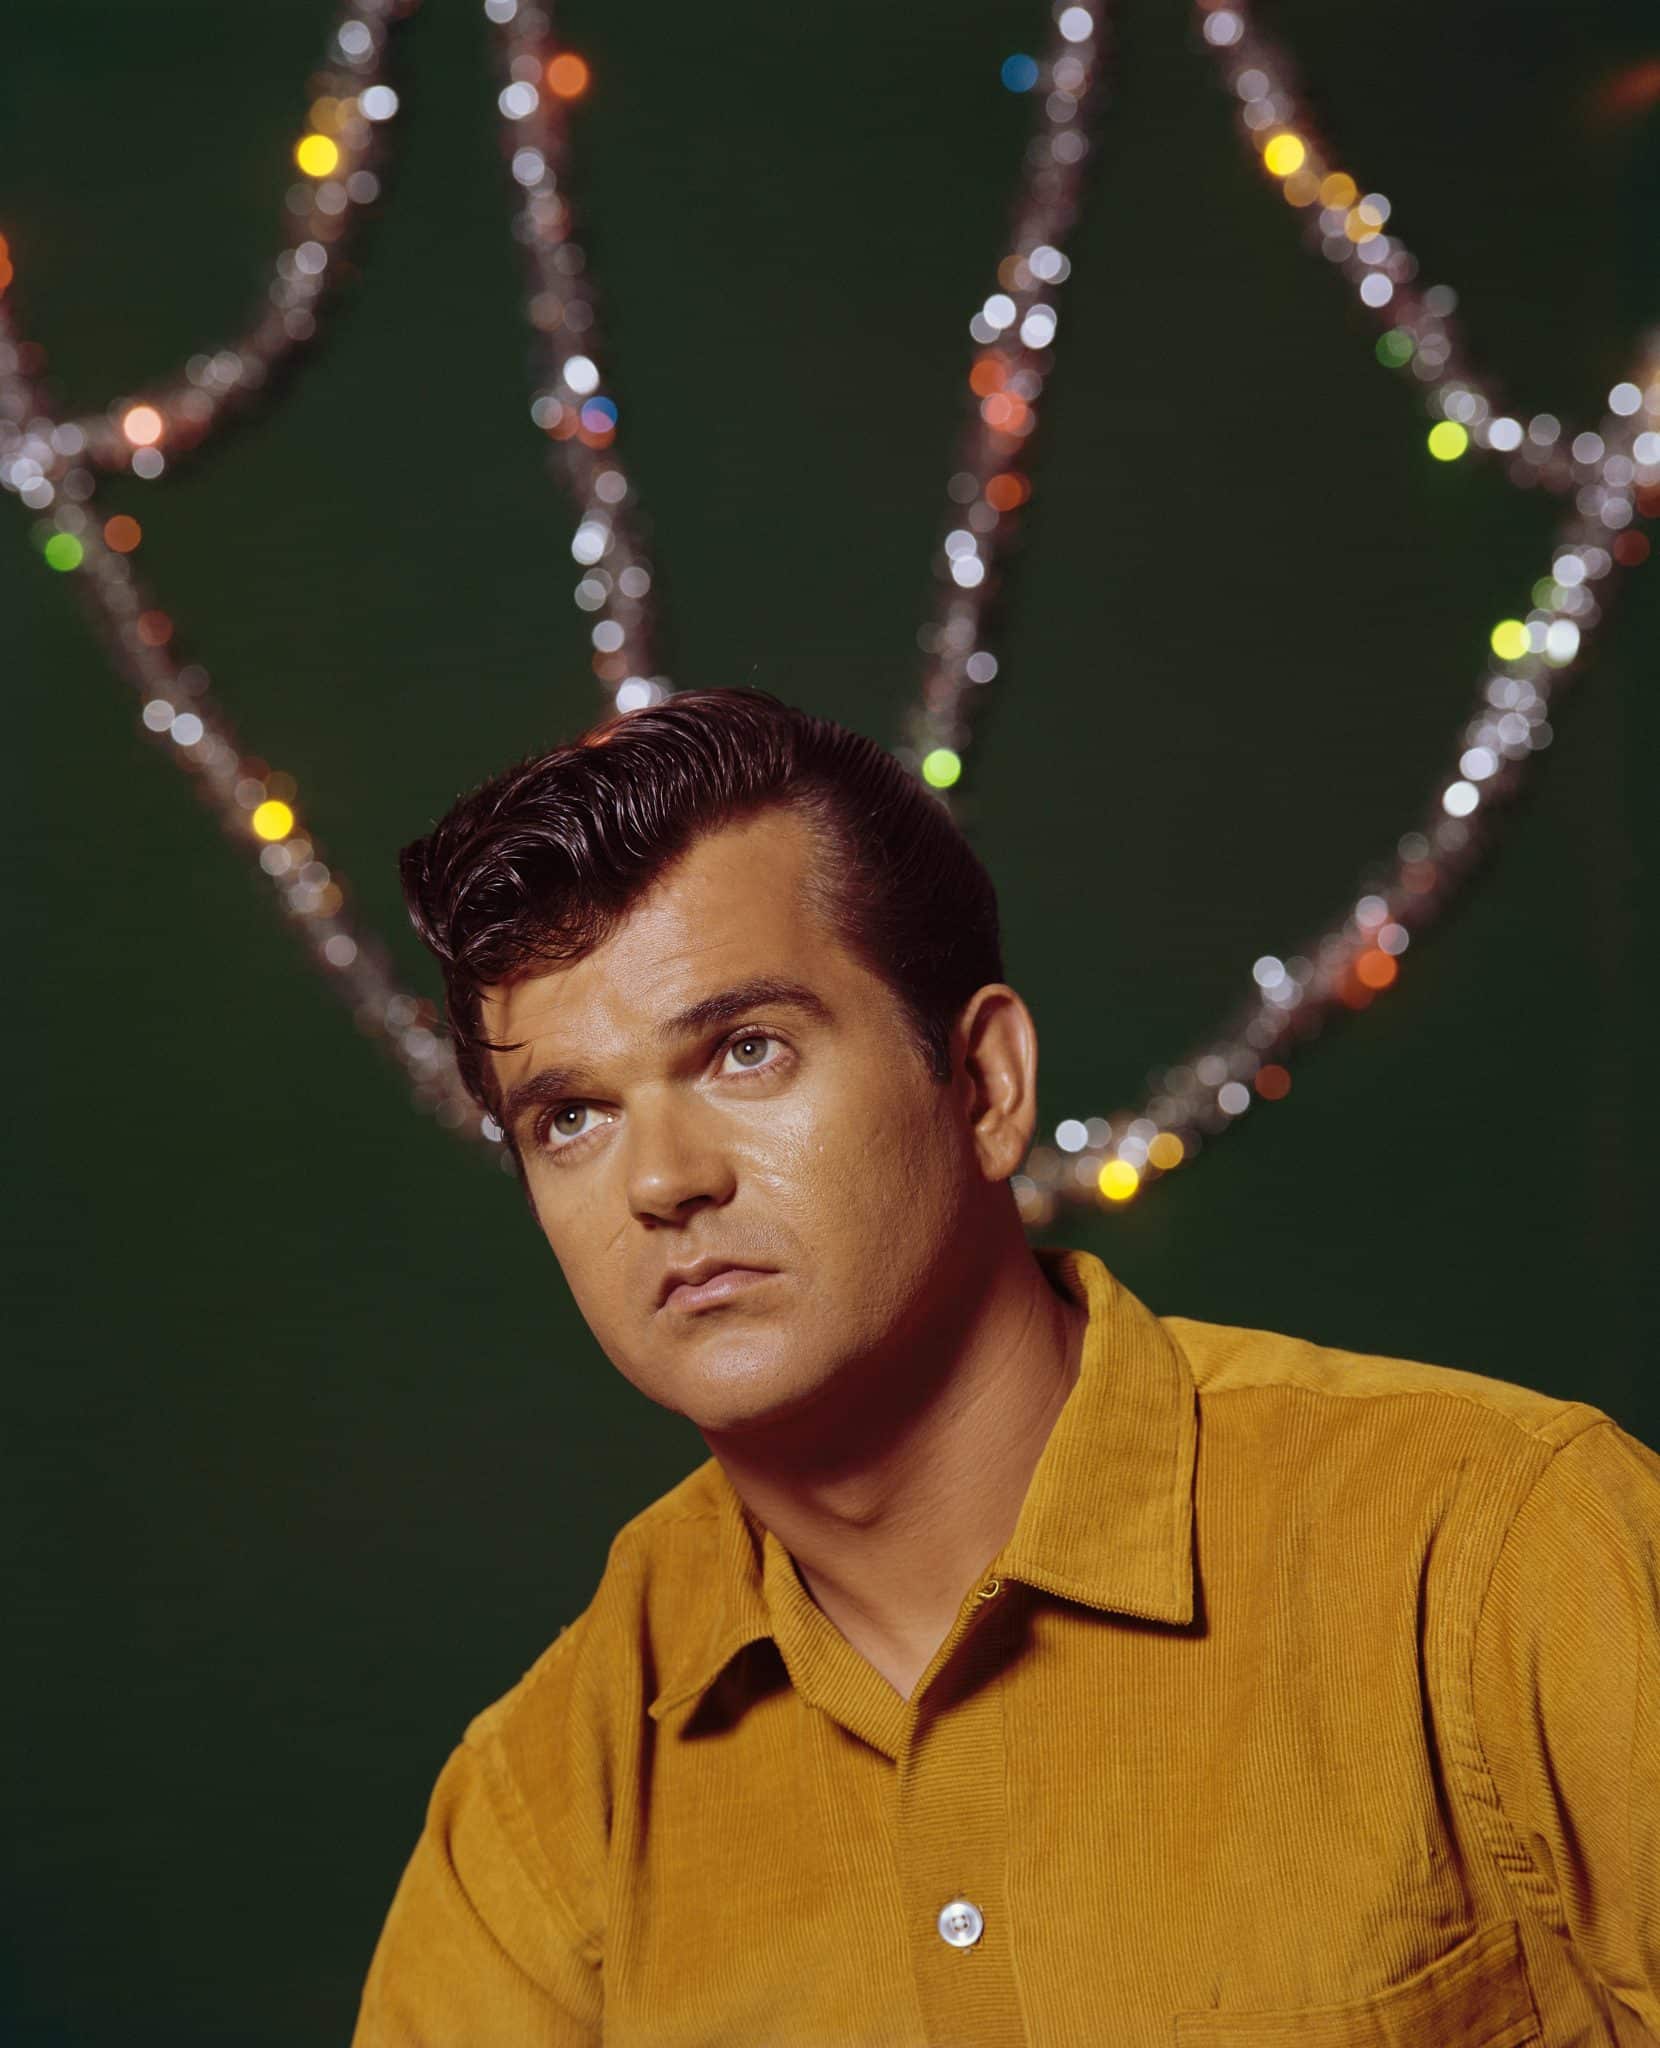 Conway Twitty sporting his early career hairstyle